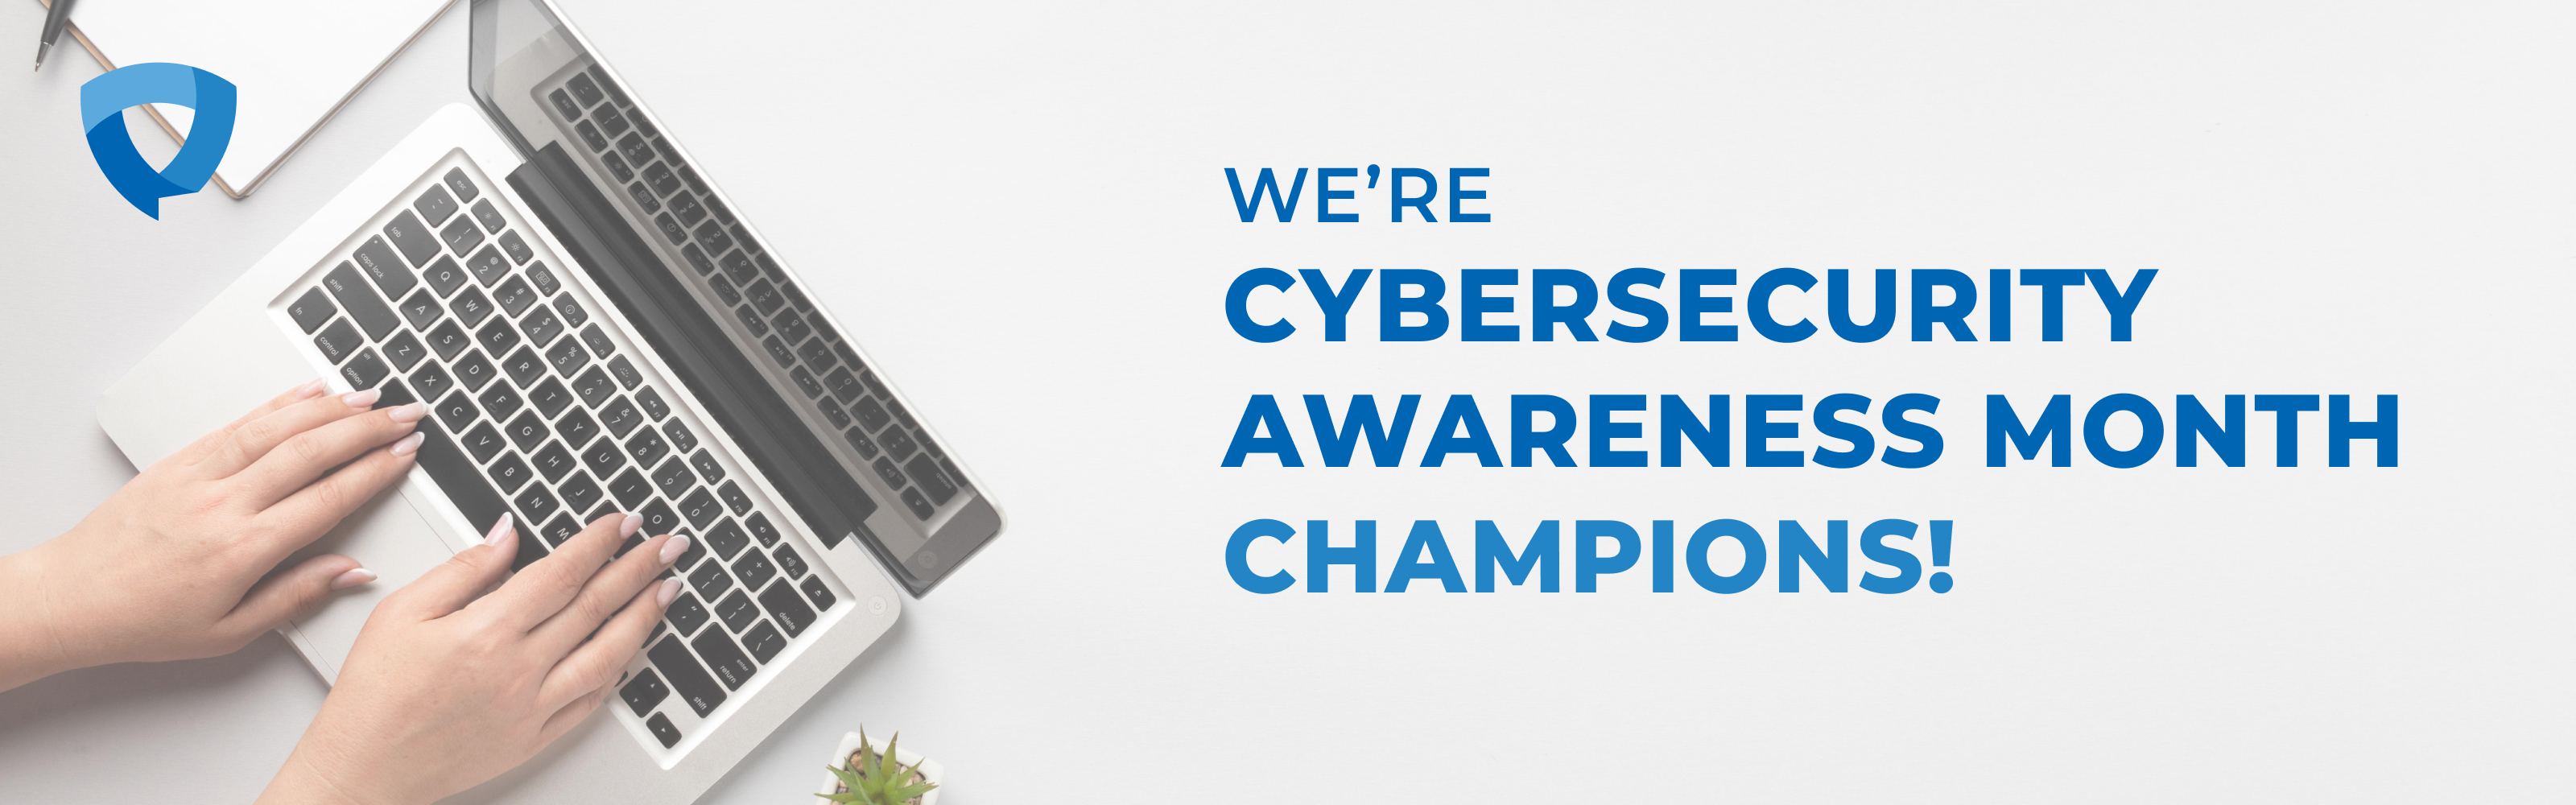 We're Cybersecurity Awareness Month Champions